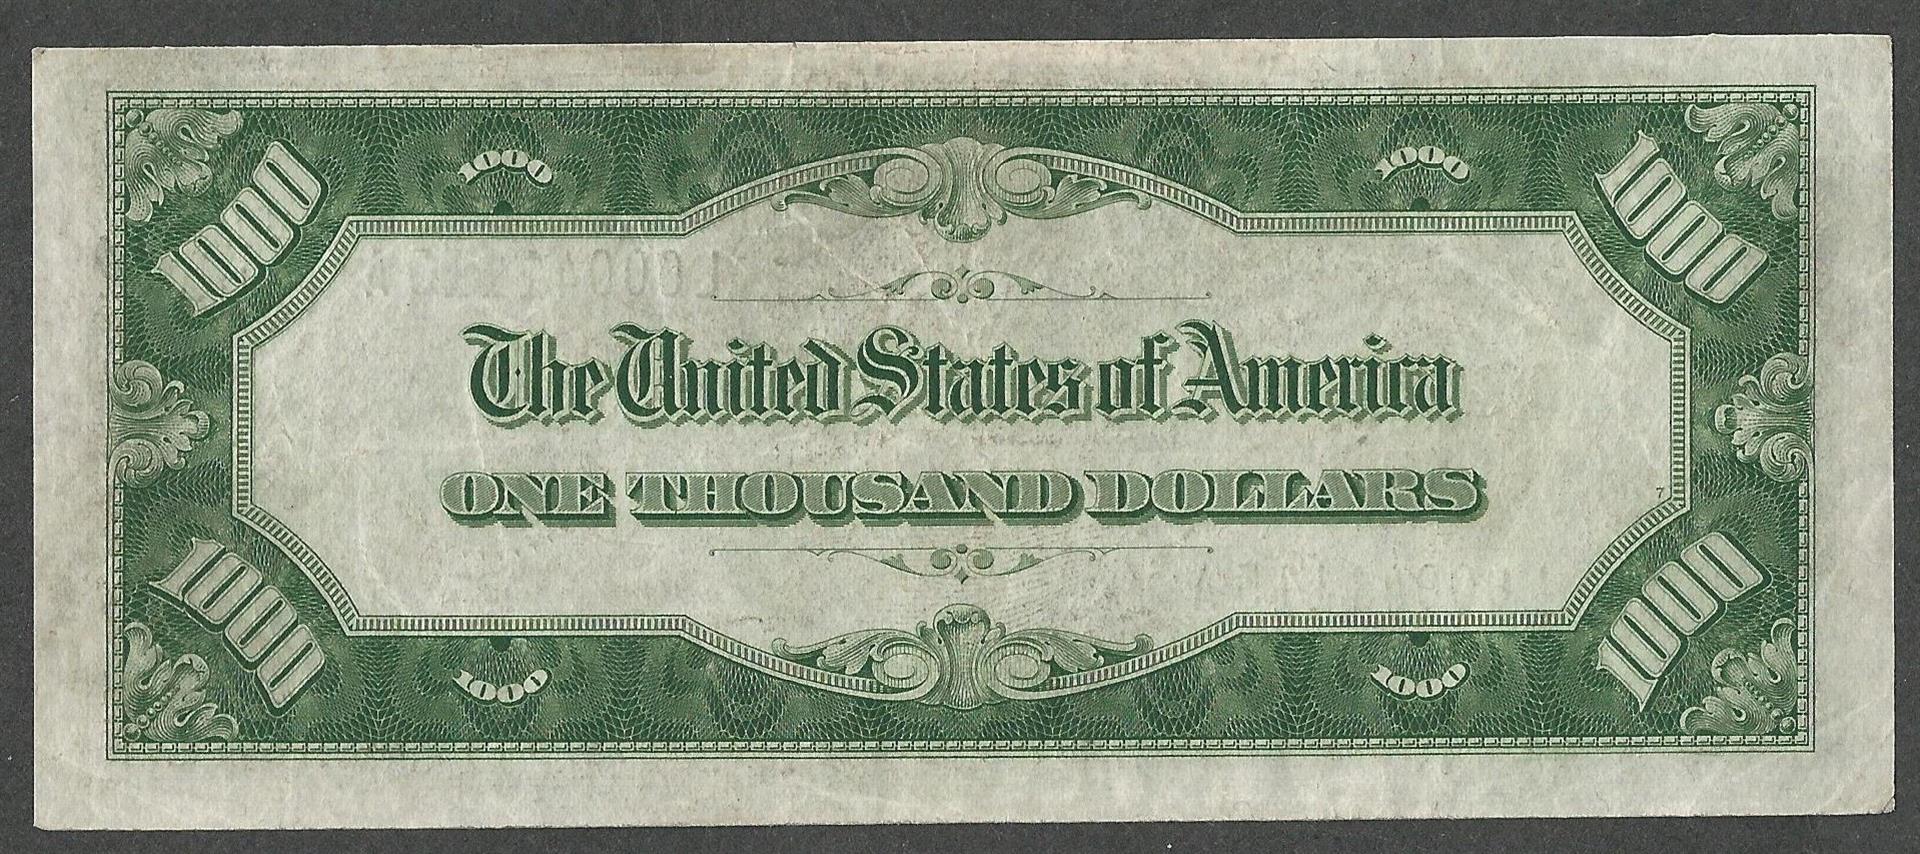 1934 $1000 Federal Reserve Note San Francisco